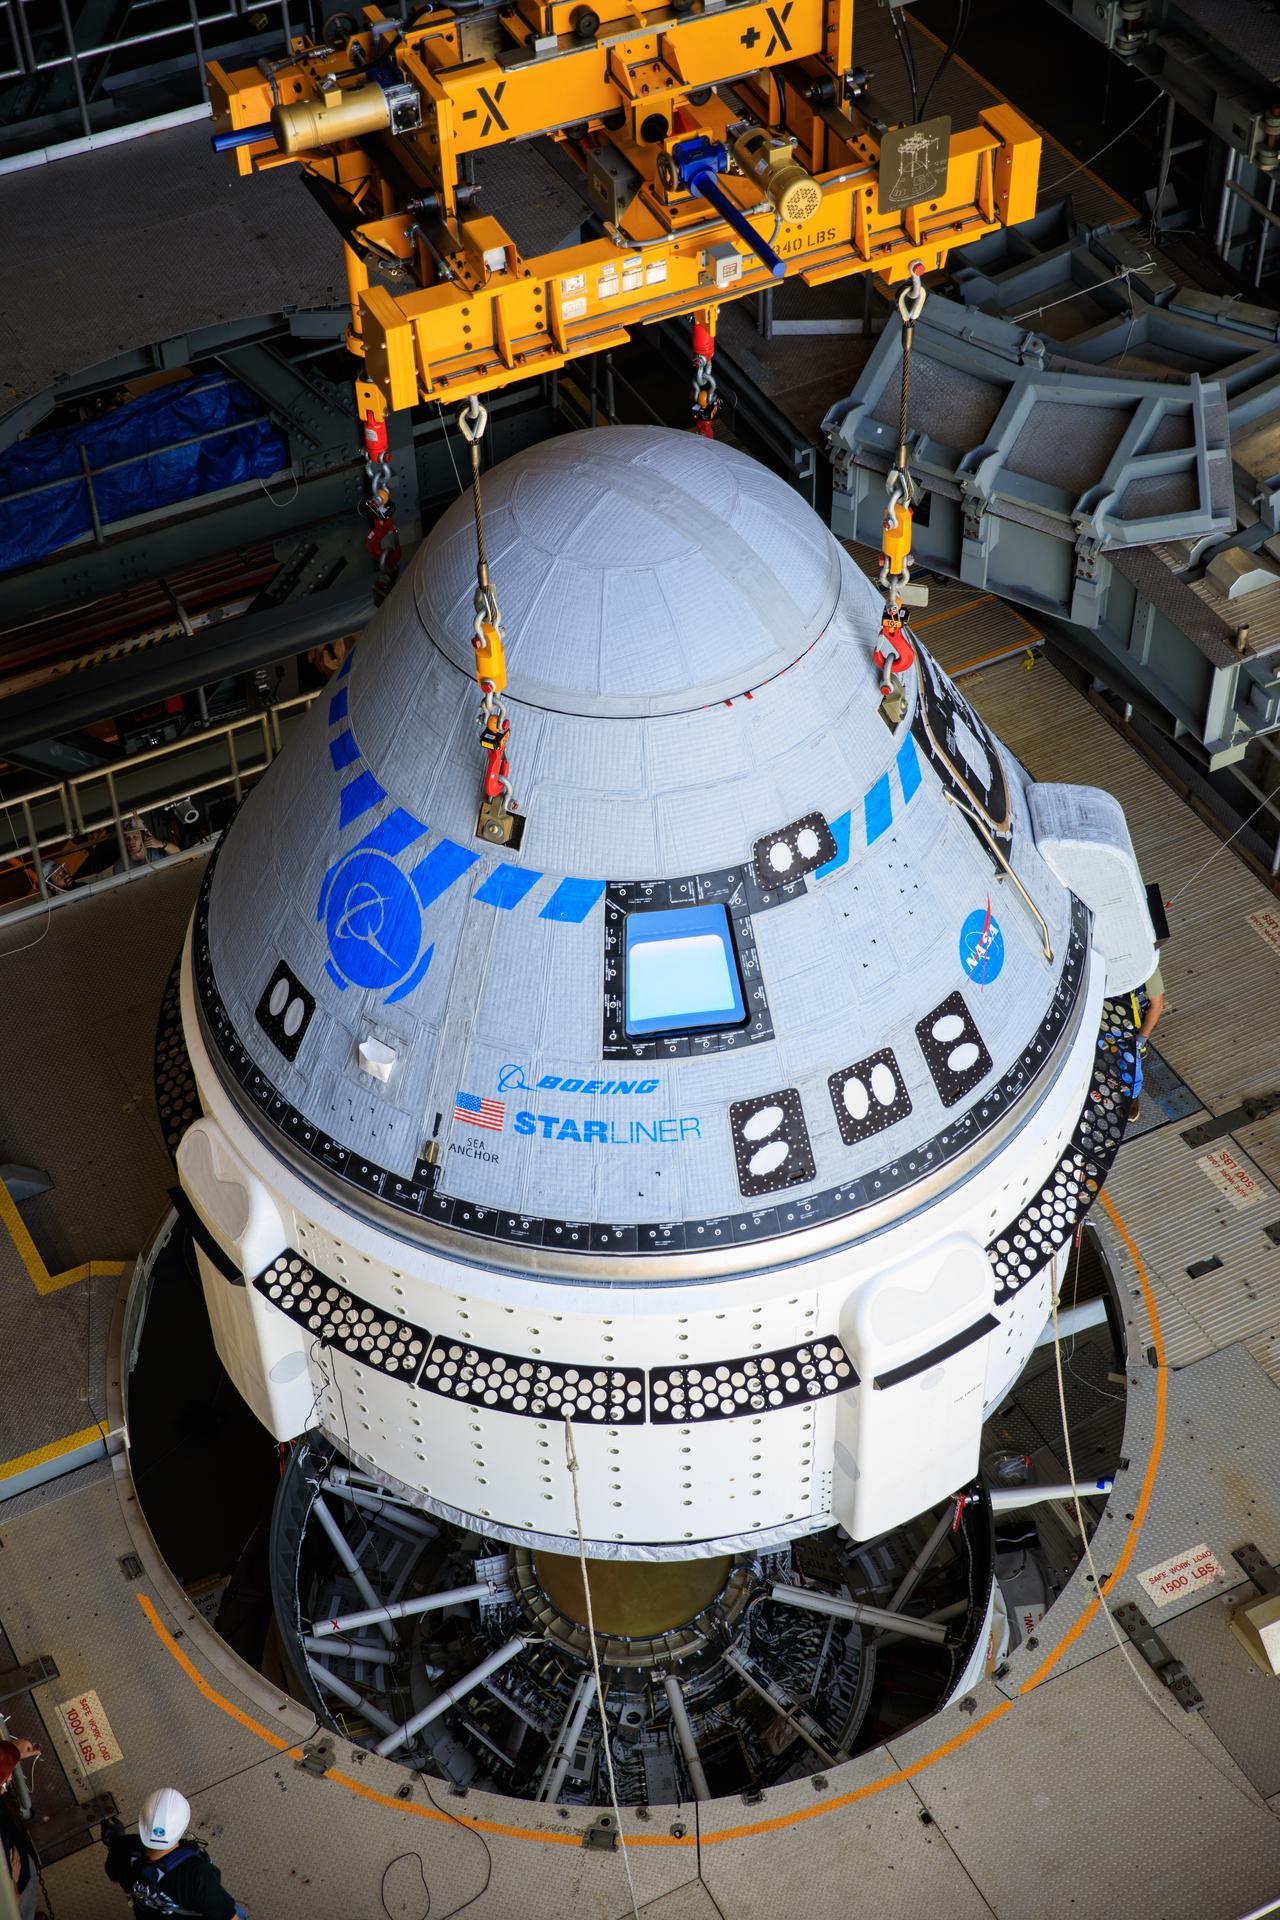 The Boeing CST-100 Starliner spacecraft is lifted at the Vertical Integration Facility at Space Launch Complex-41 at Florida's Cape Canaveral Space Force Station on May 4, 2022.